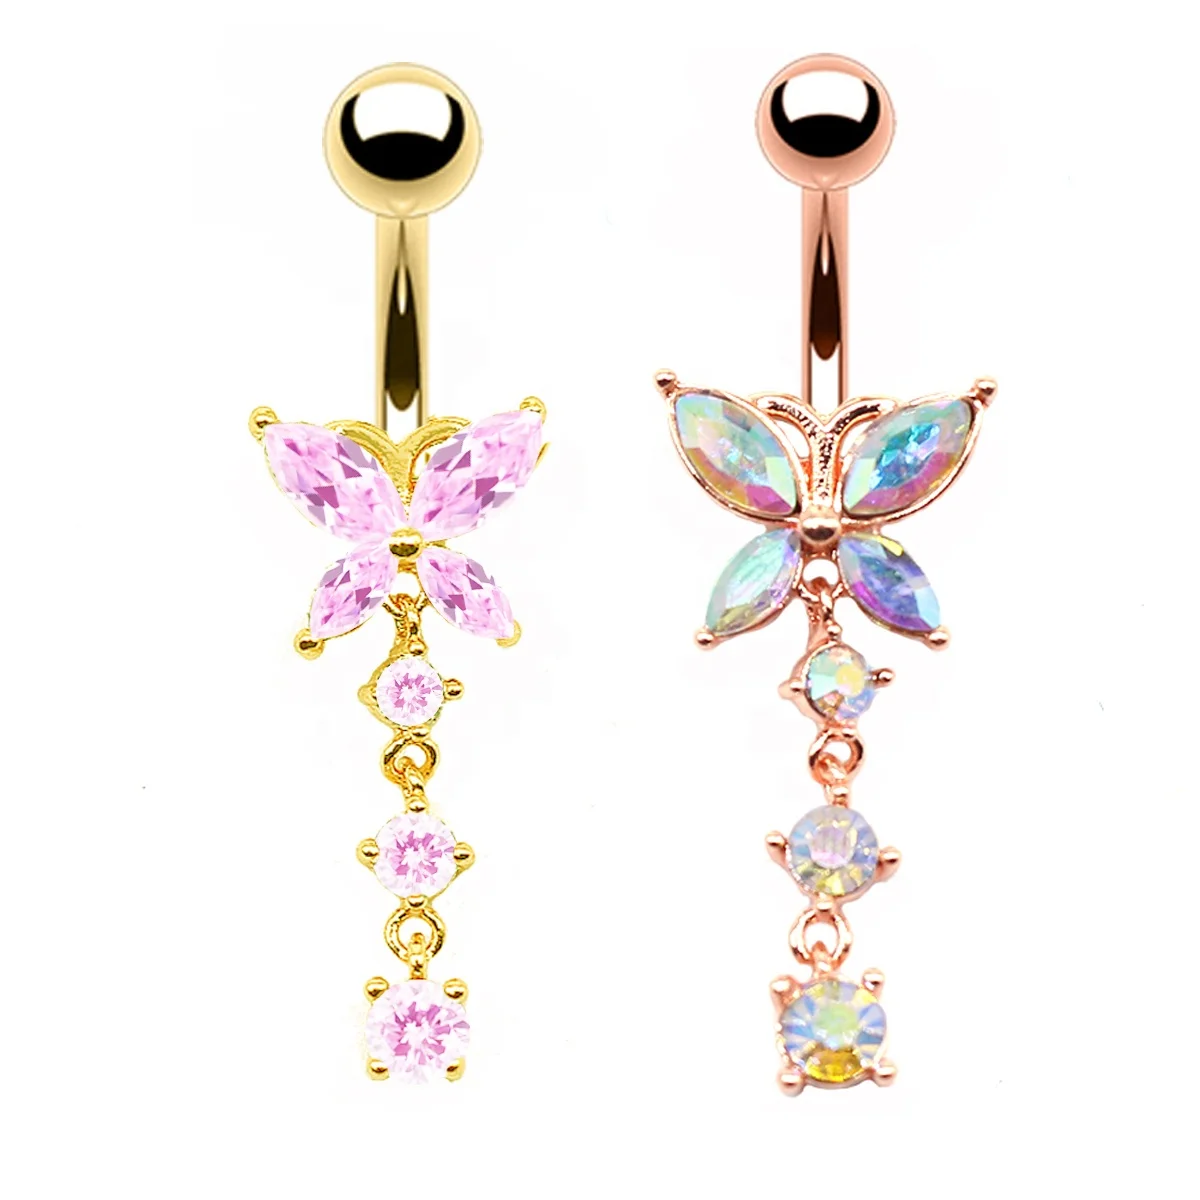 

Gaby hotsale CZ butterfly shape animal dangling Belly Button Ring belly navel ring body piercing jewelry, Silver color